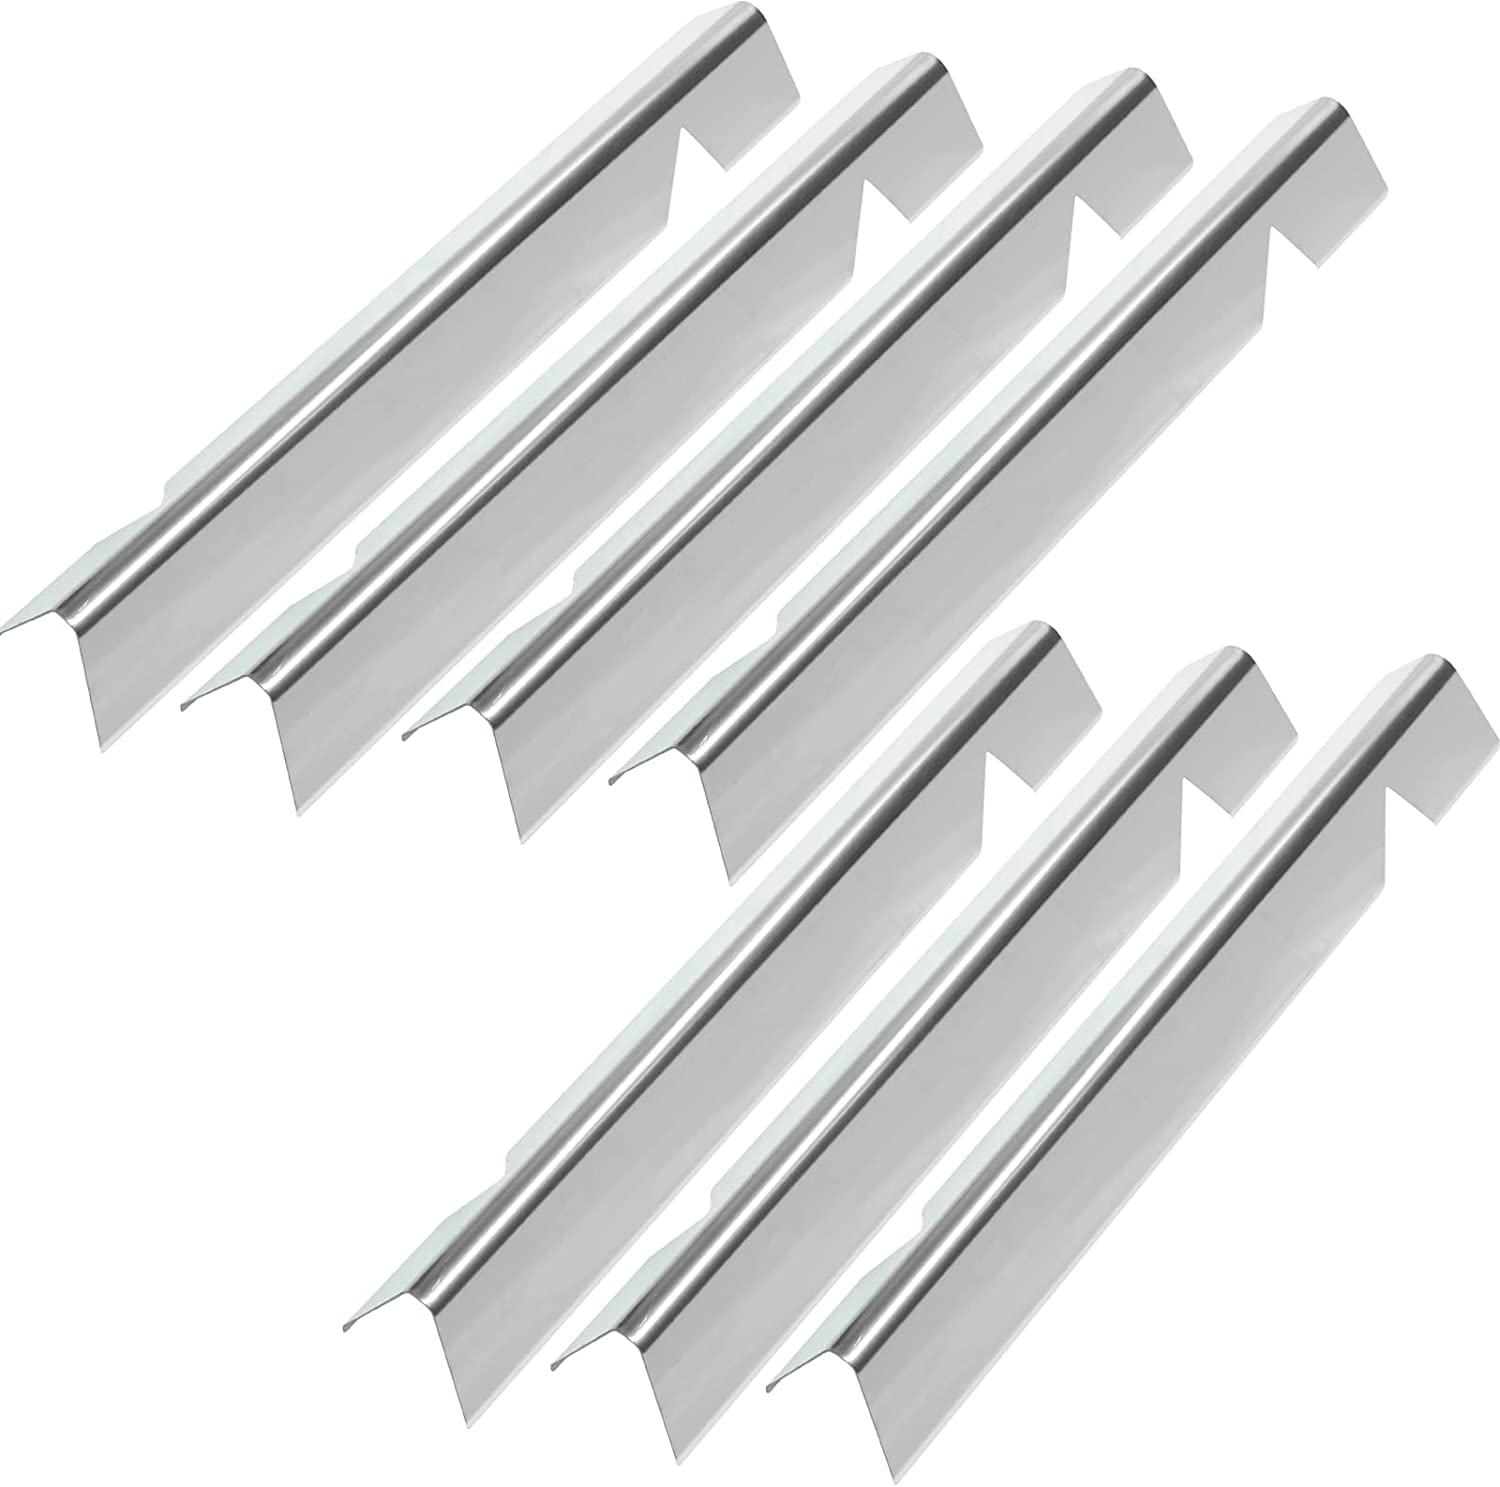 Stainless Steel Flavorizer Bars Heat Plates Replacement for Weber Genesis II 400 - $60.36